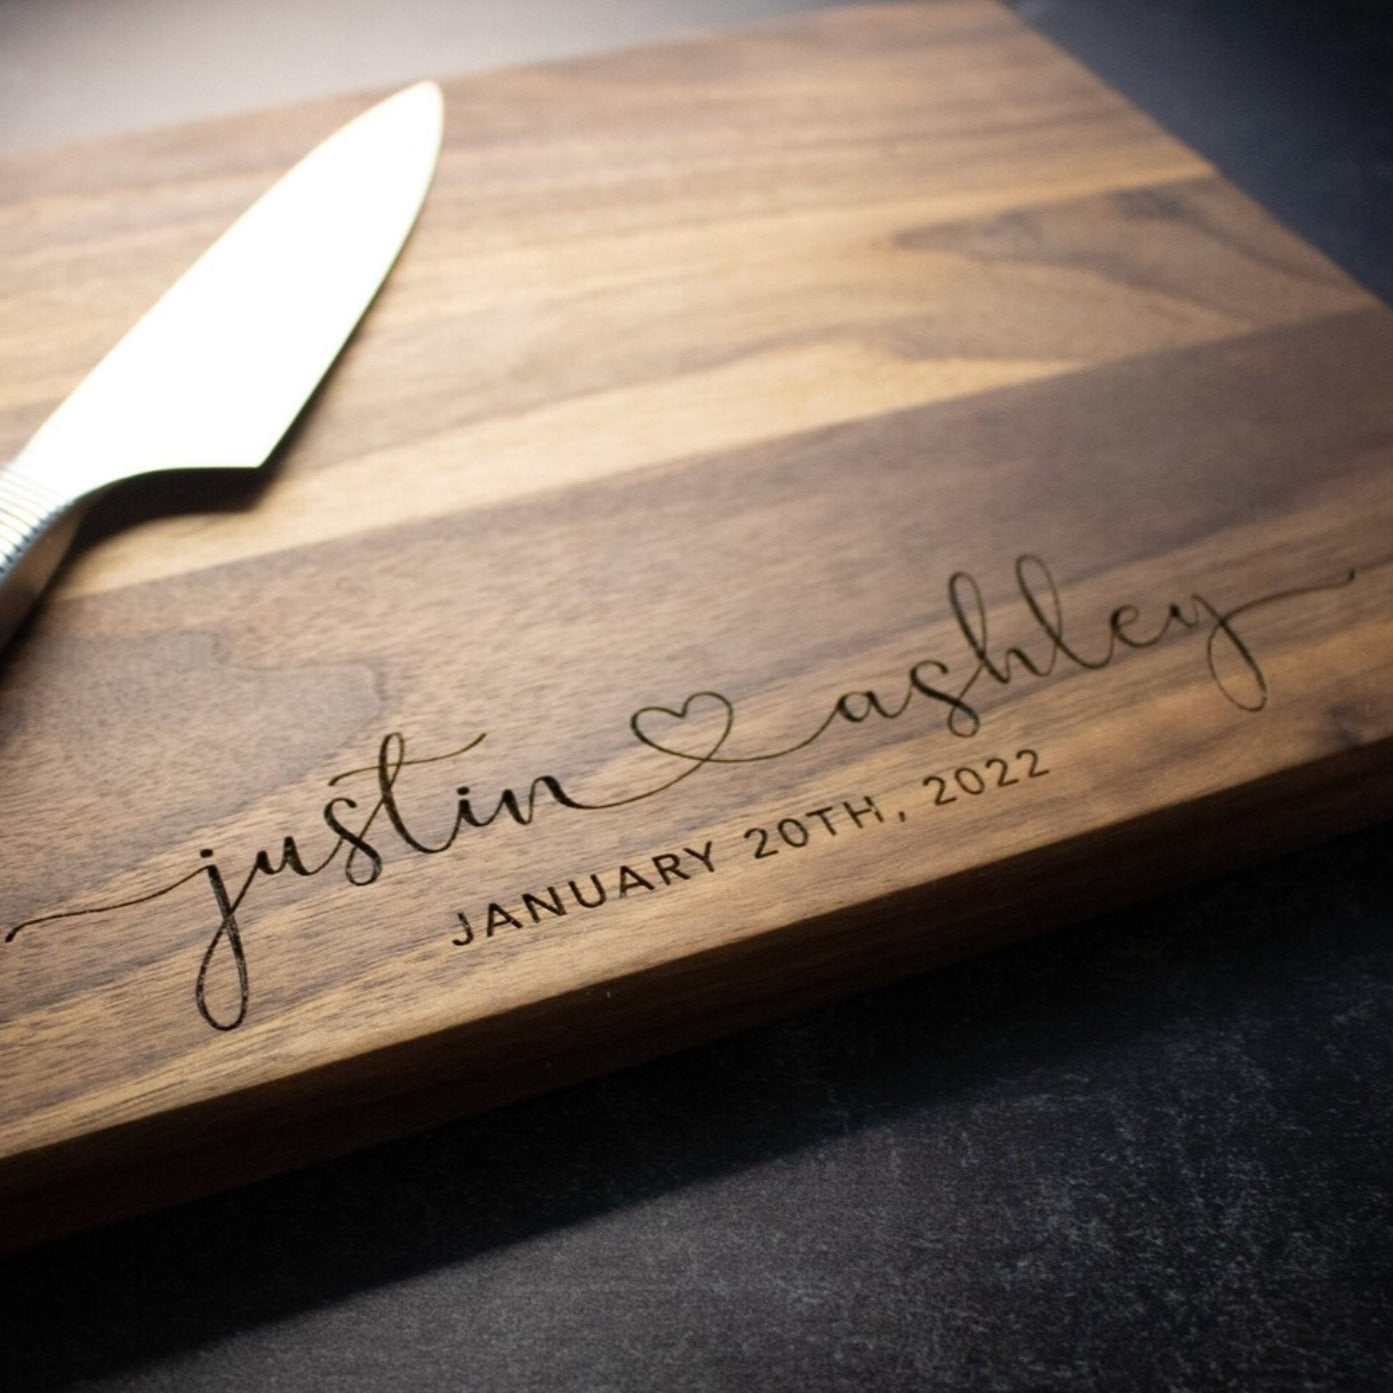 Tempered Glass Cutting Boards: Are They Safe? - Chef's Vision